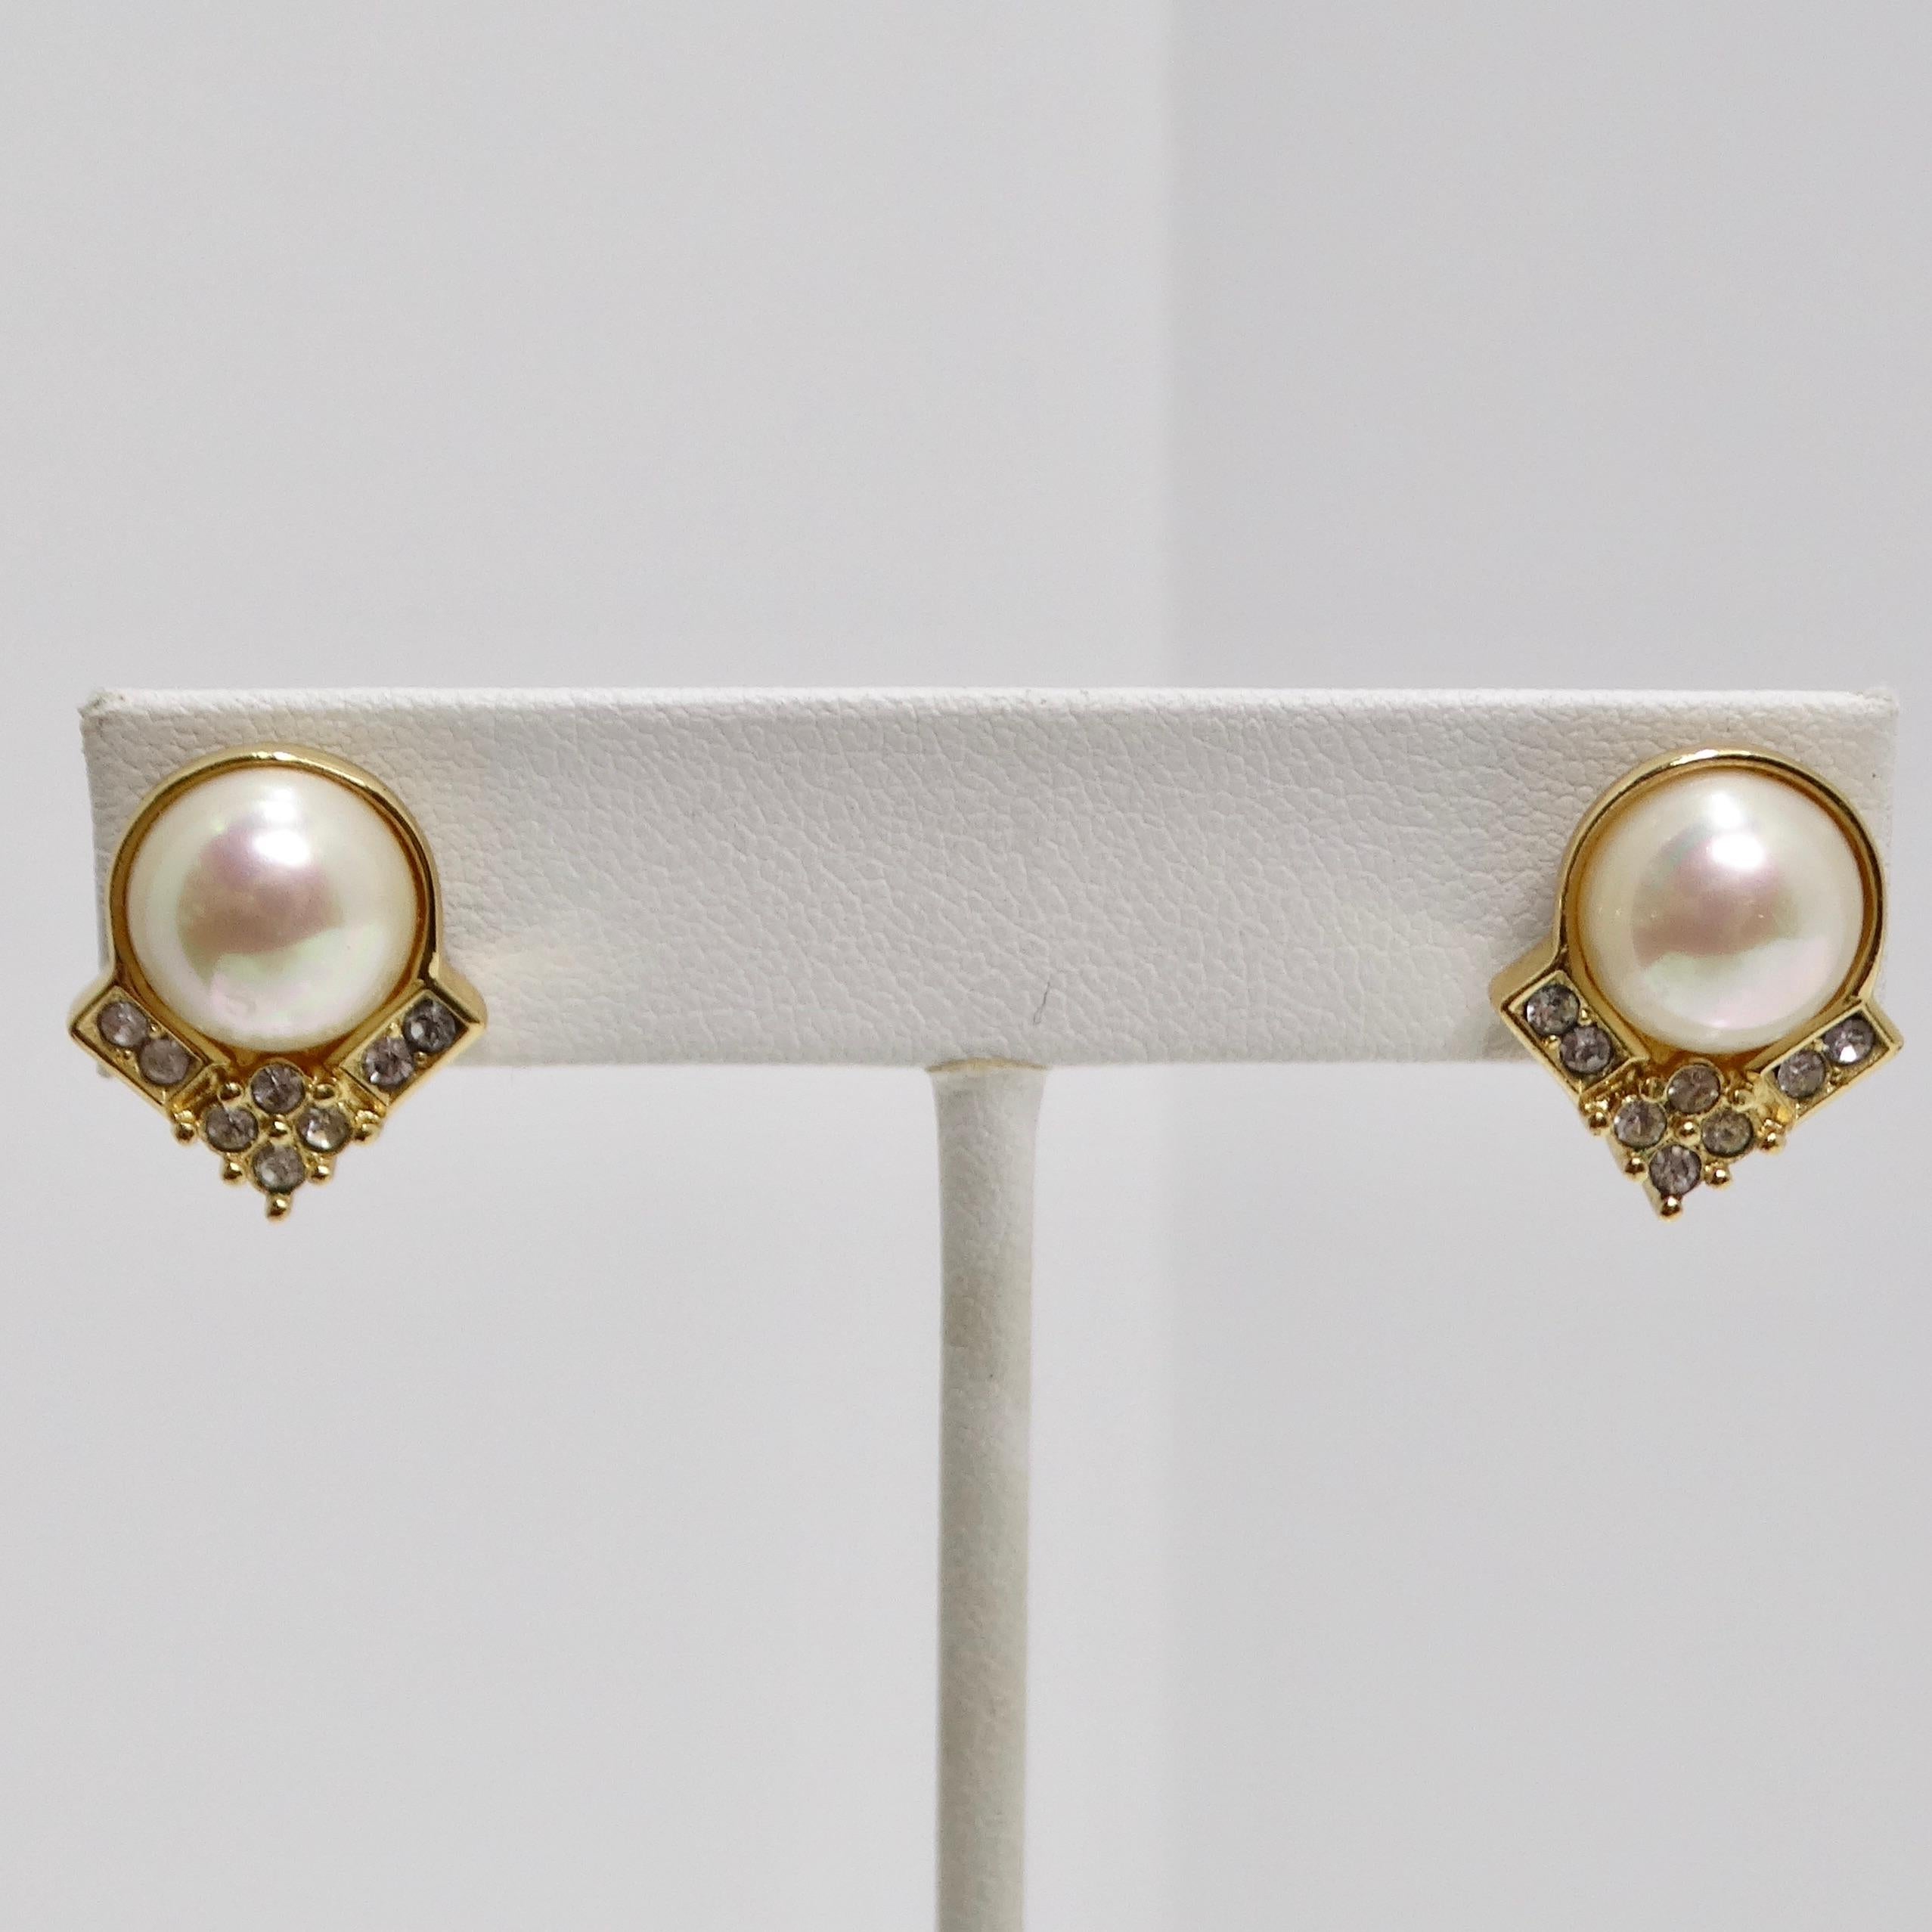 Introducing the 14K Gold Plated Vintage Pearl Earrings, a sophisticated and glamorous pair of stud earrings from the 1990s. These beautiful earrings feature stunning white synthetic pearls, set in 14K yellow gold, which add a touch of elegance and